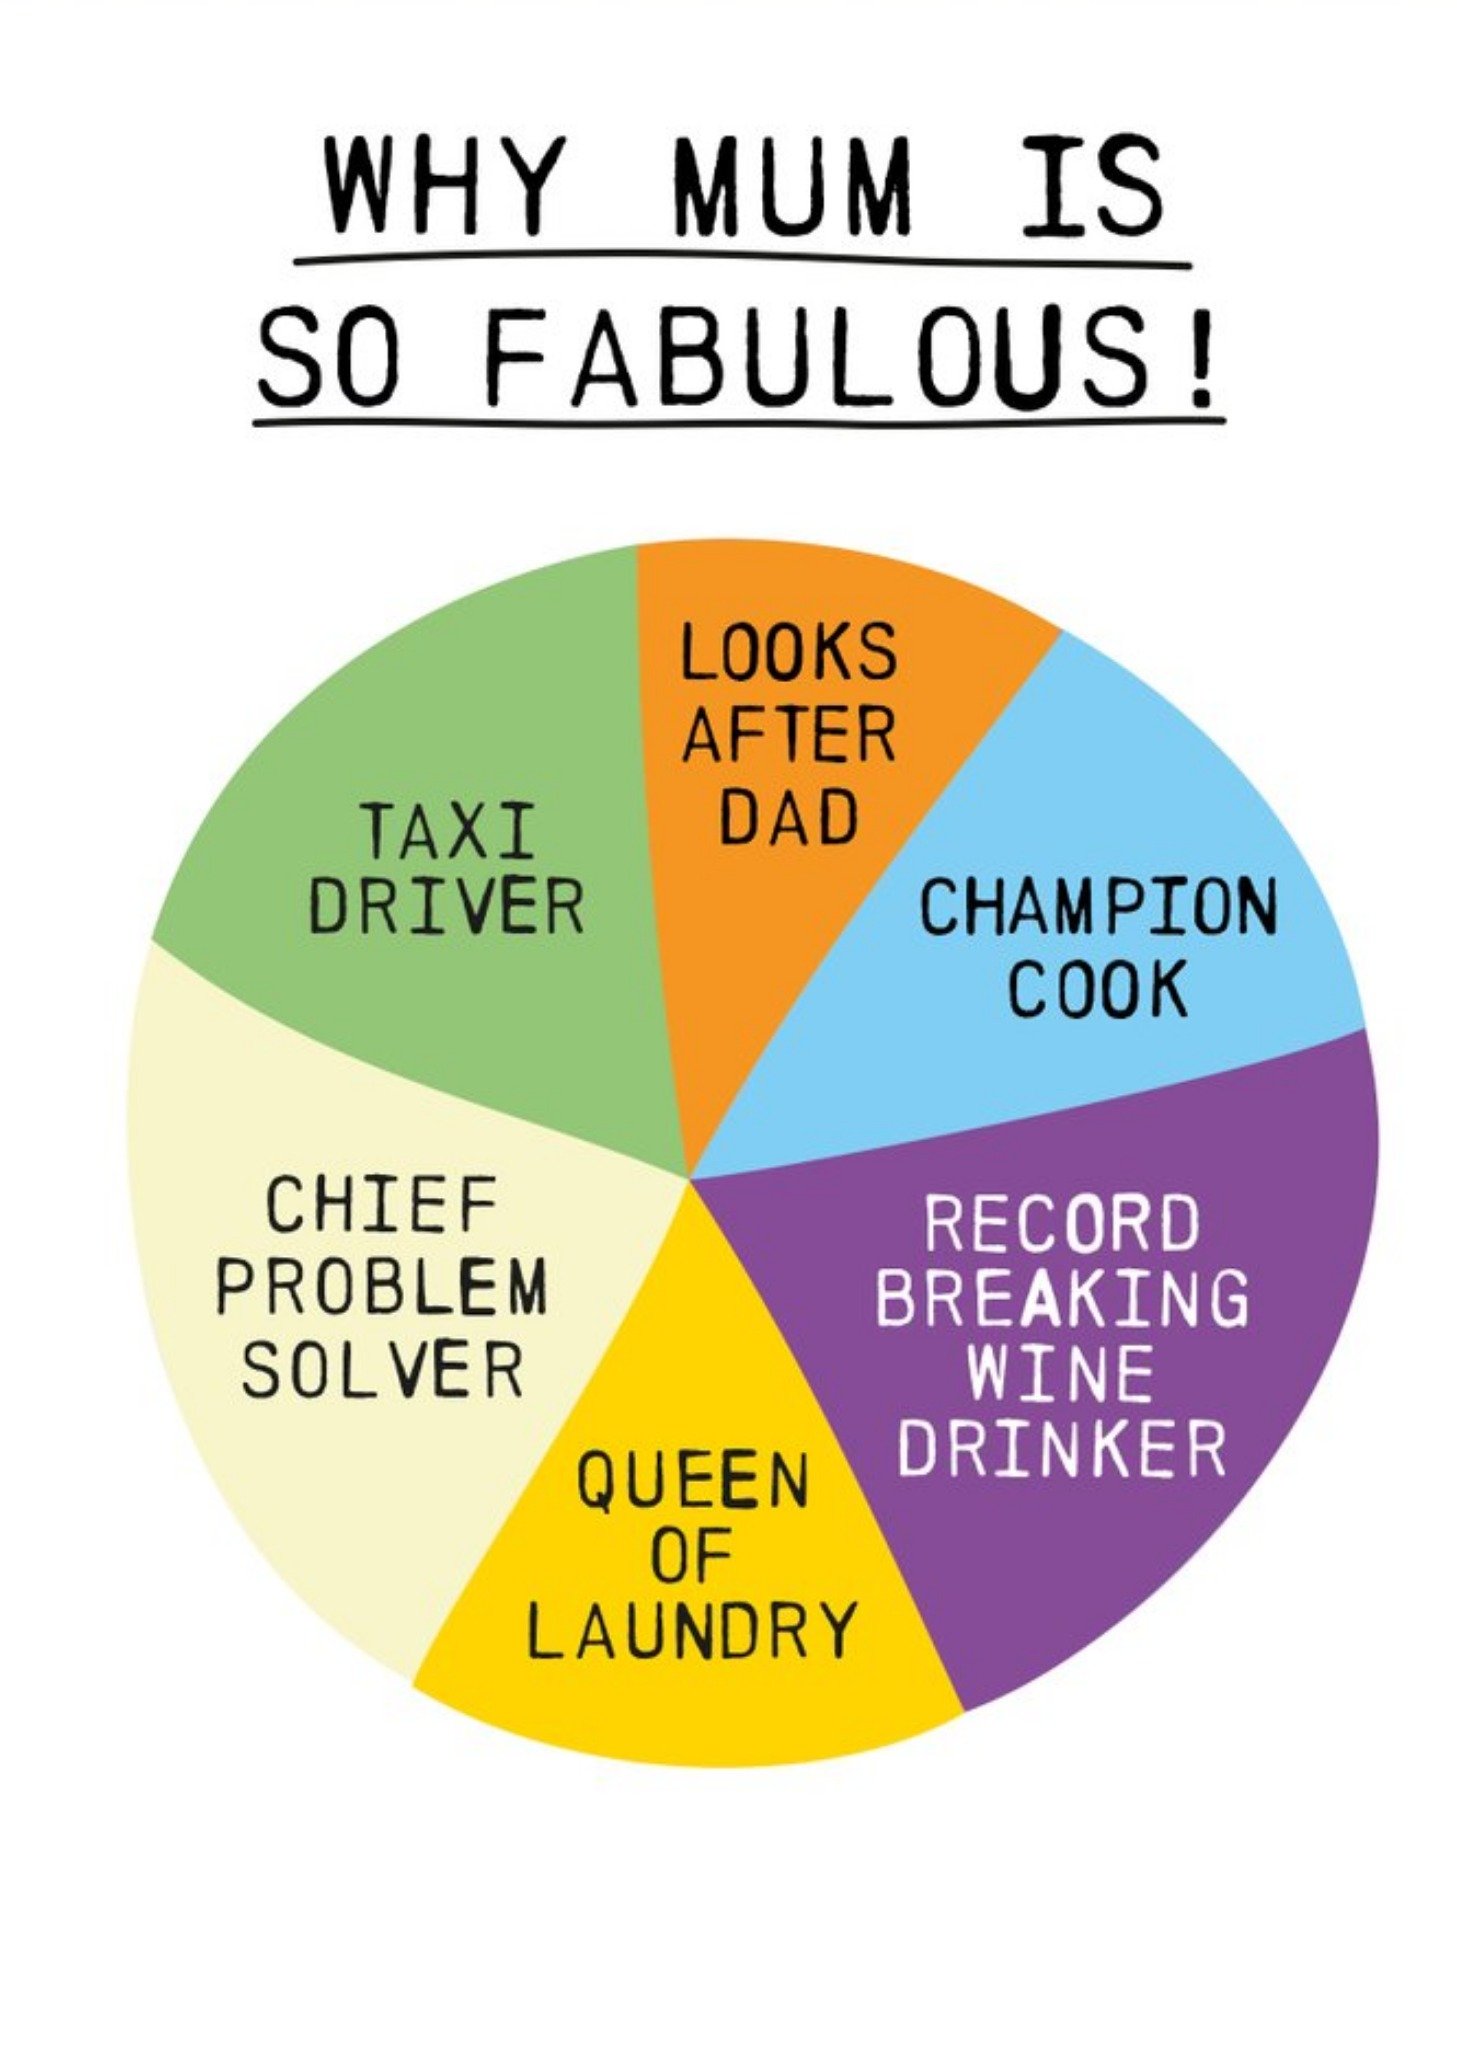 Moonpig Illustration Of A Colourful Pie Chart Humorous Why Mum Is Fabulous Card Ecard